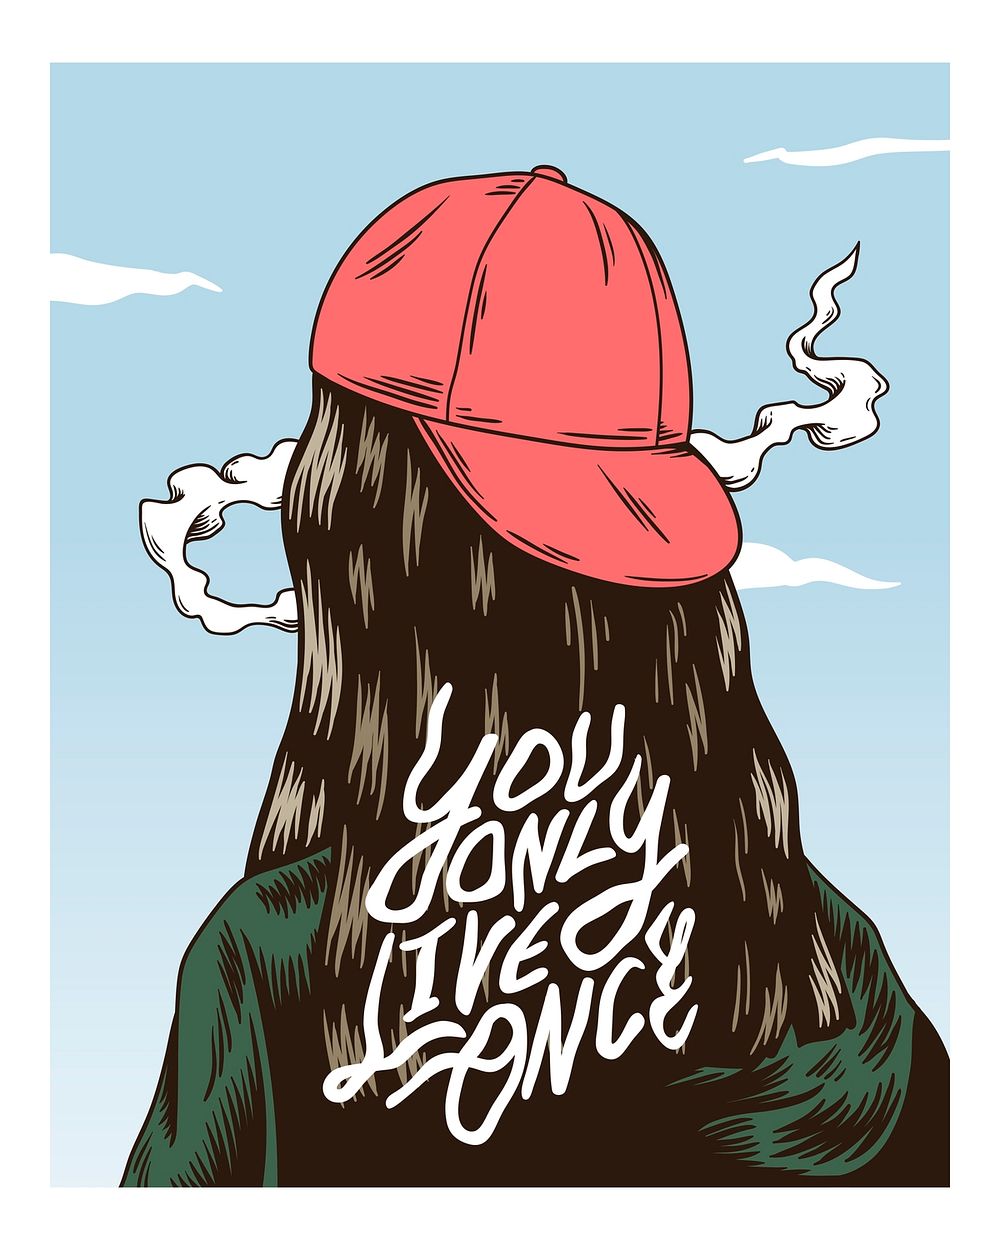 You only live once illustration wall art print and poster.